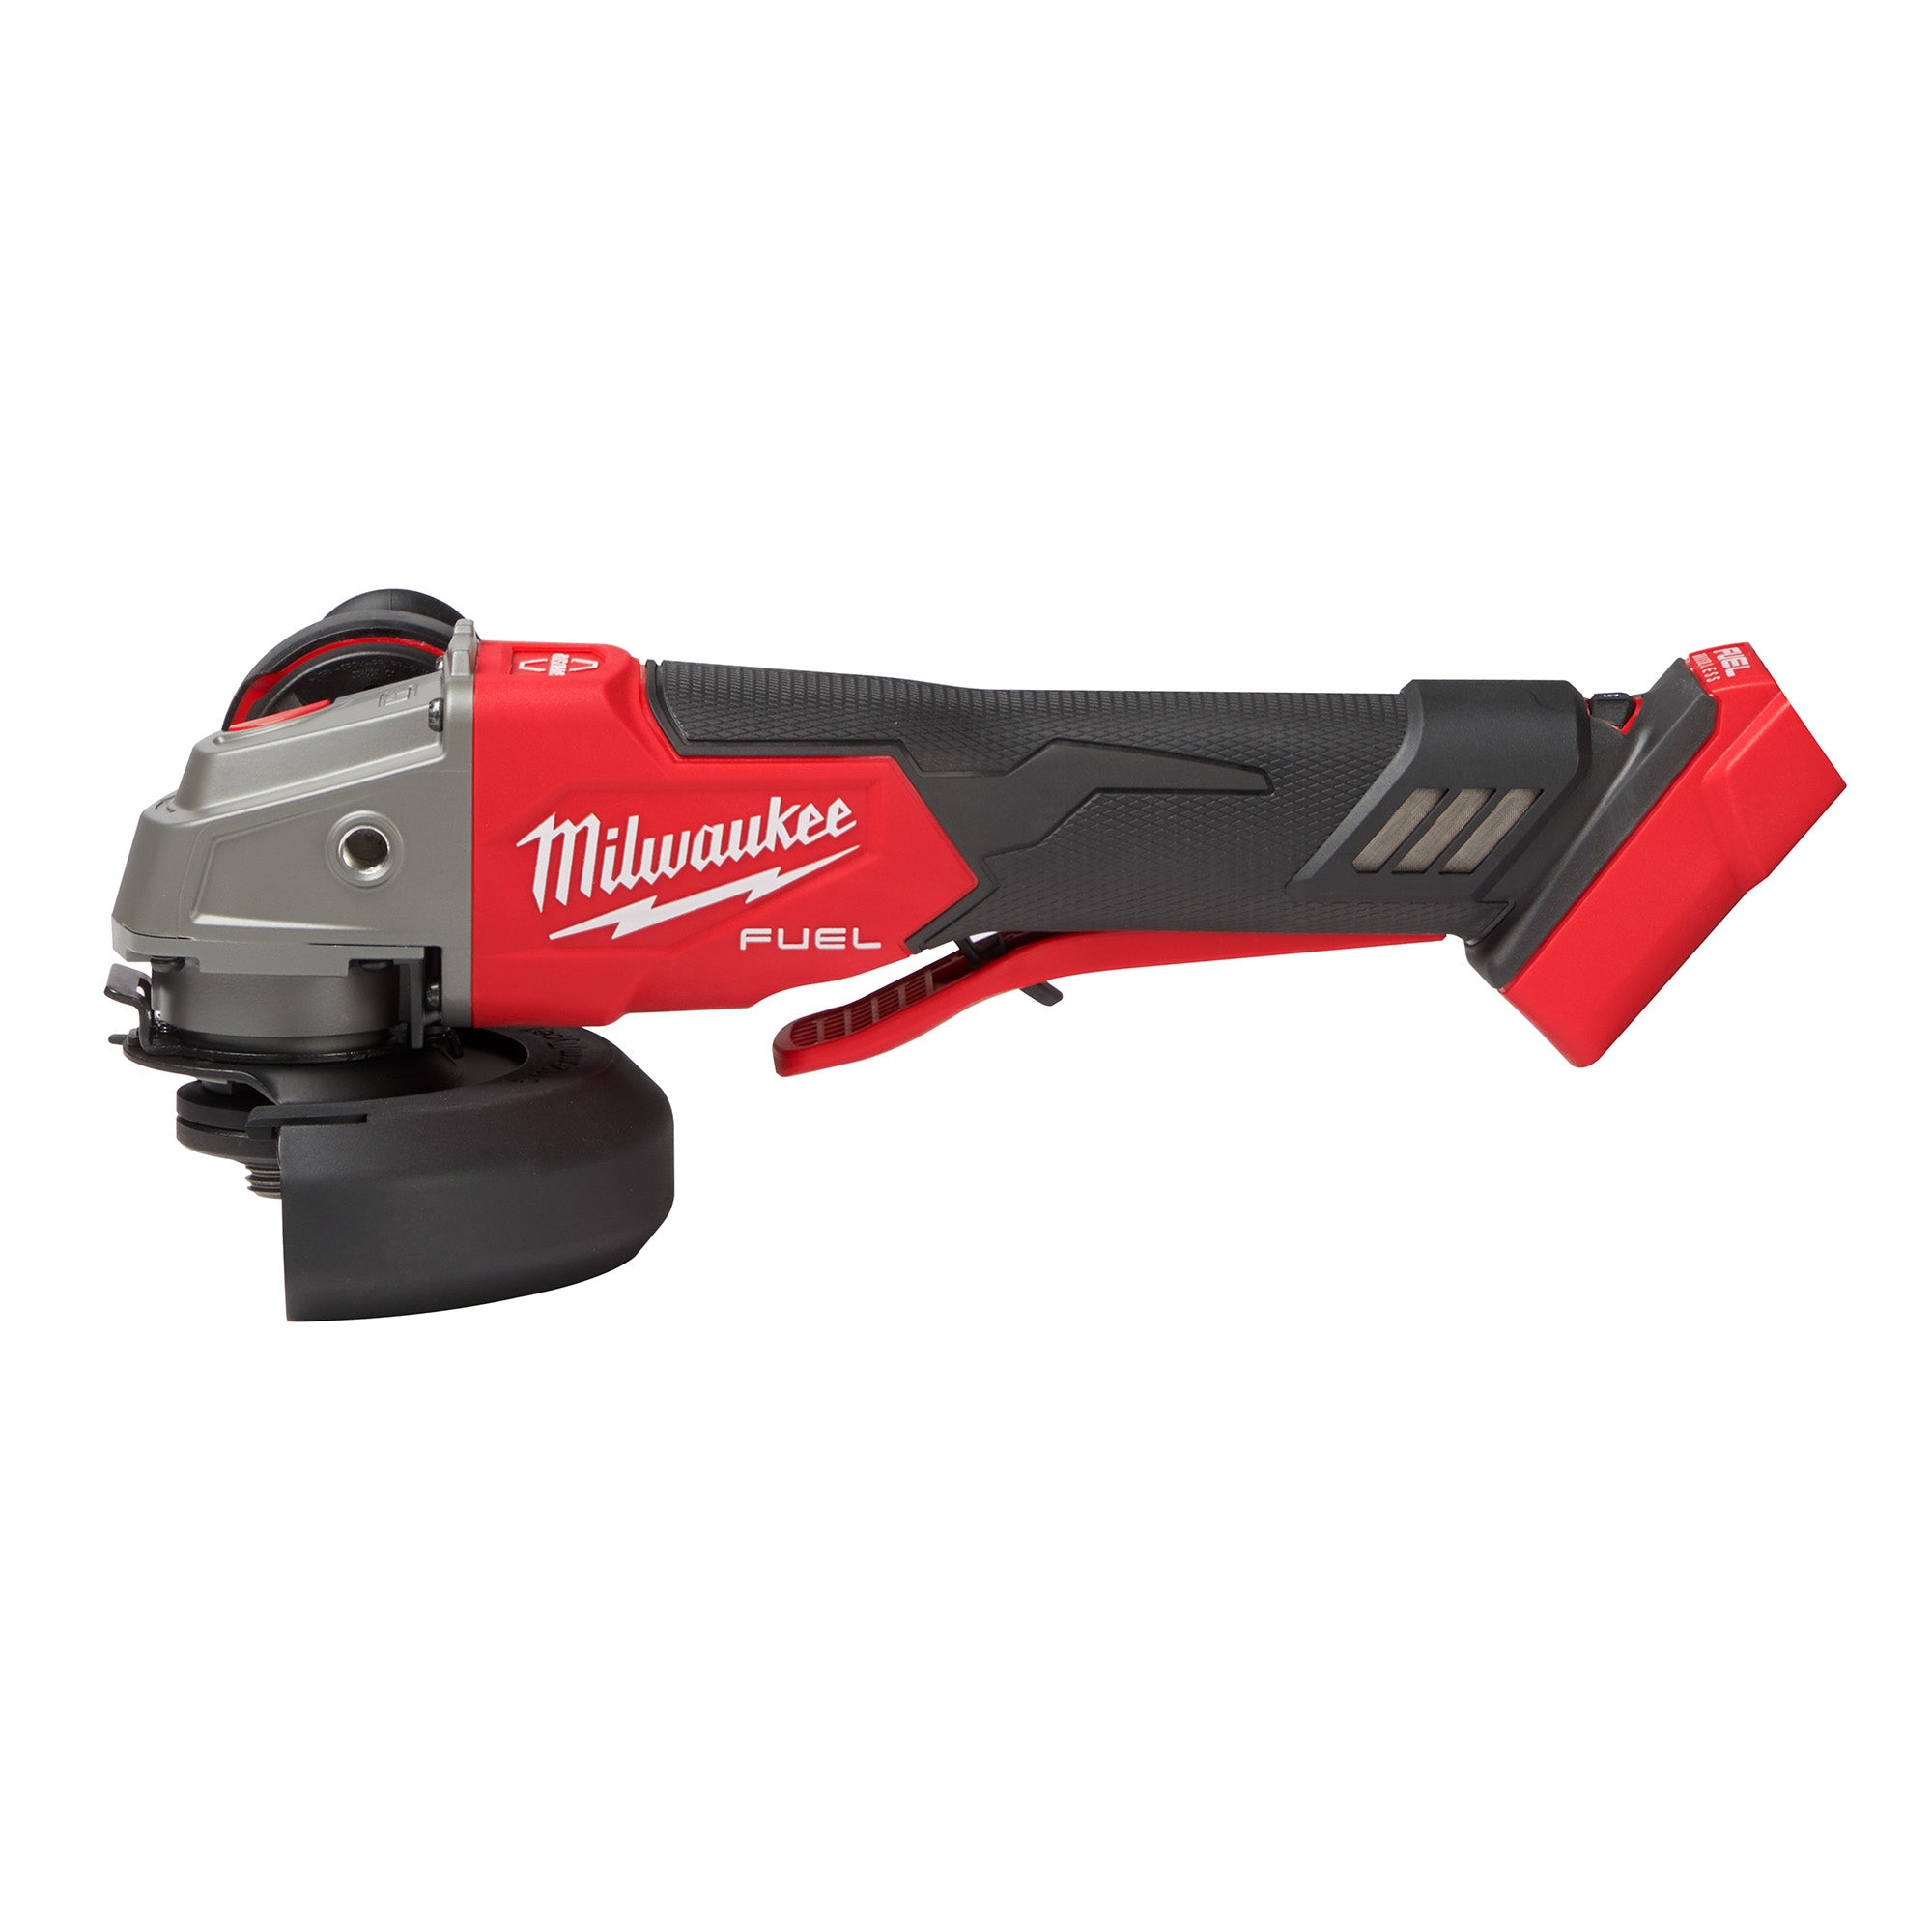 18V M18 FUEL Lithium-Ion Brushless Cordless 4-1/2" / 5" Variable Speed Braking Paddle Switch No-Lock Grinder (Tool Only)